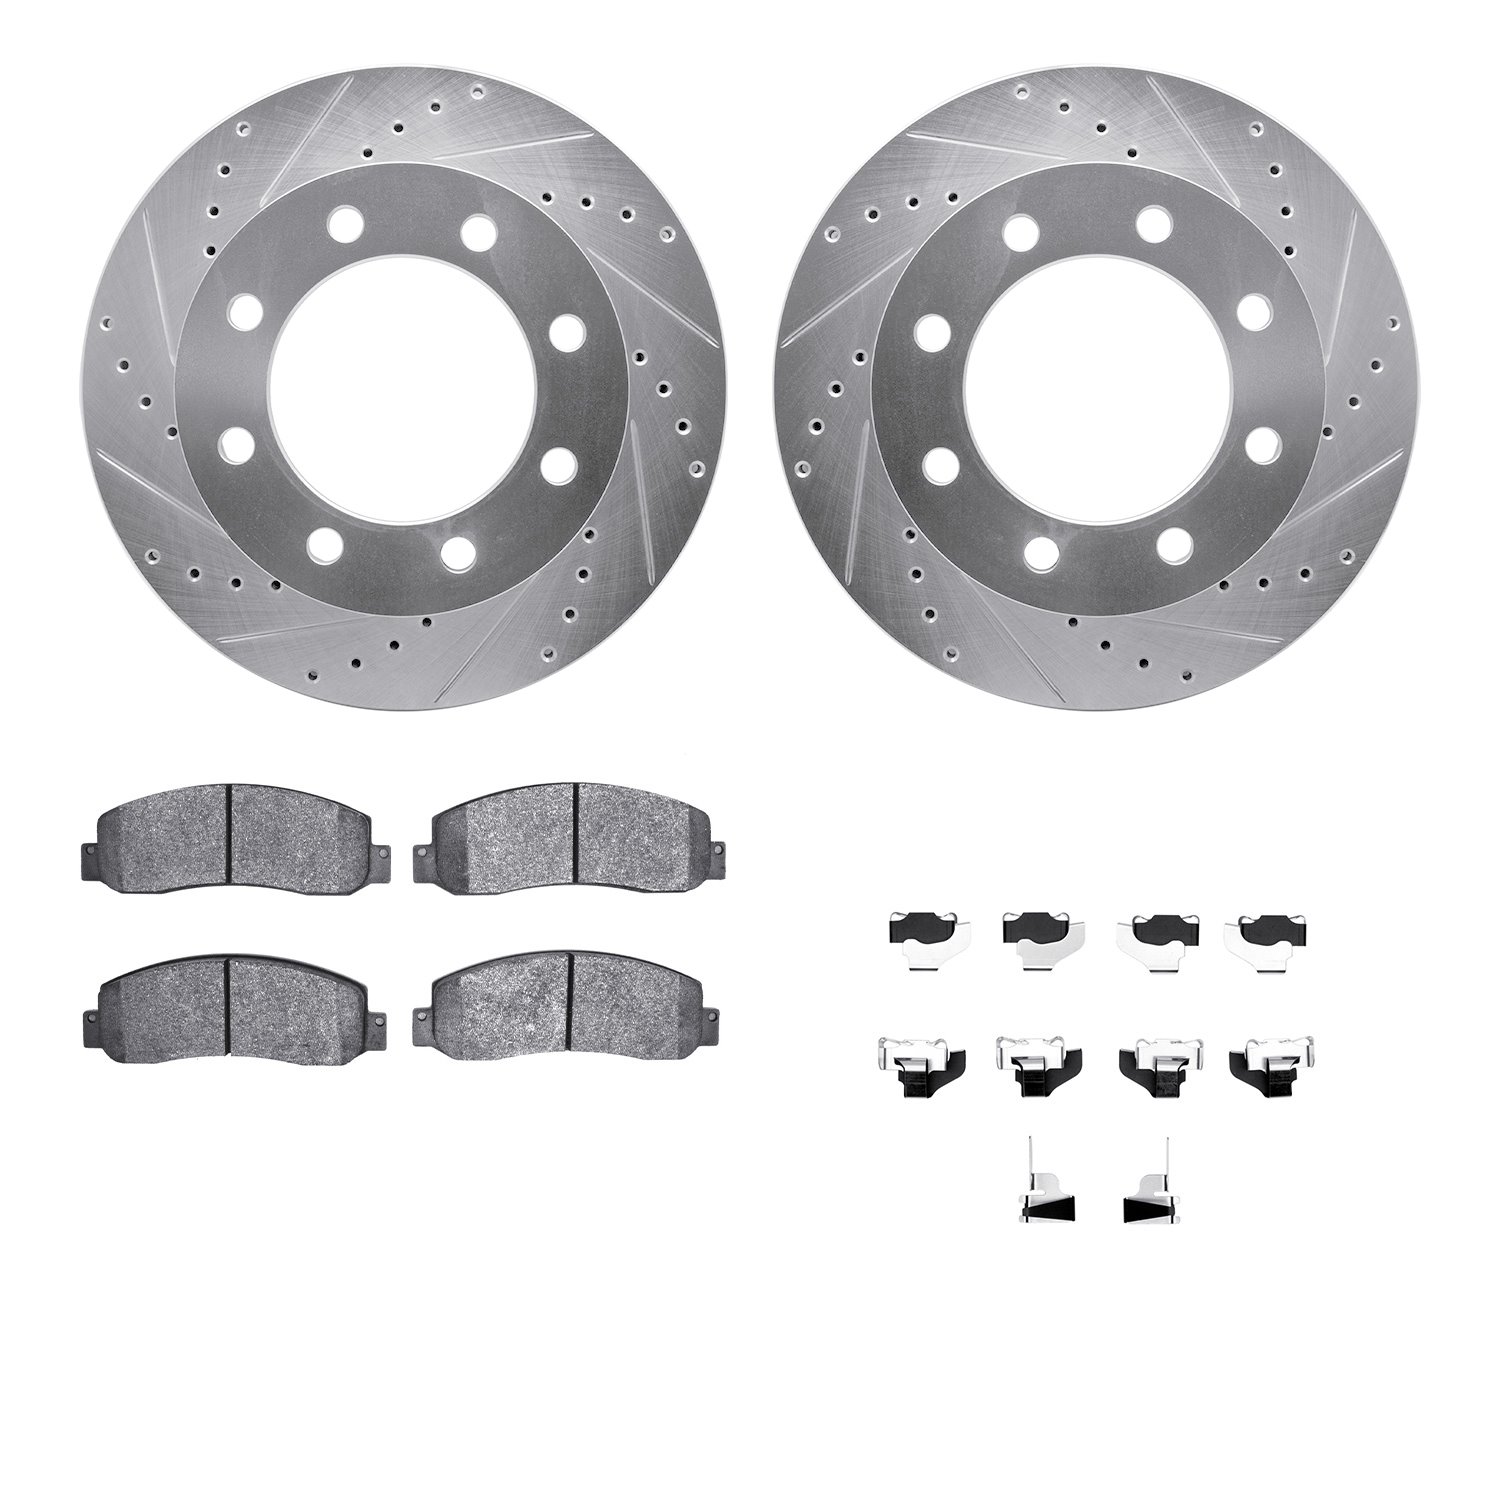 7412-54081 Drilled/Slotted Brake Rotors with Ultimate-Duty Brake Pads Kit & Hardware [Silver], 2005-2011 Ford/Lincoln/Mercury/Ma